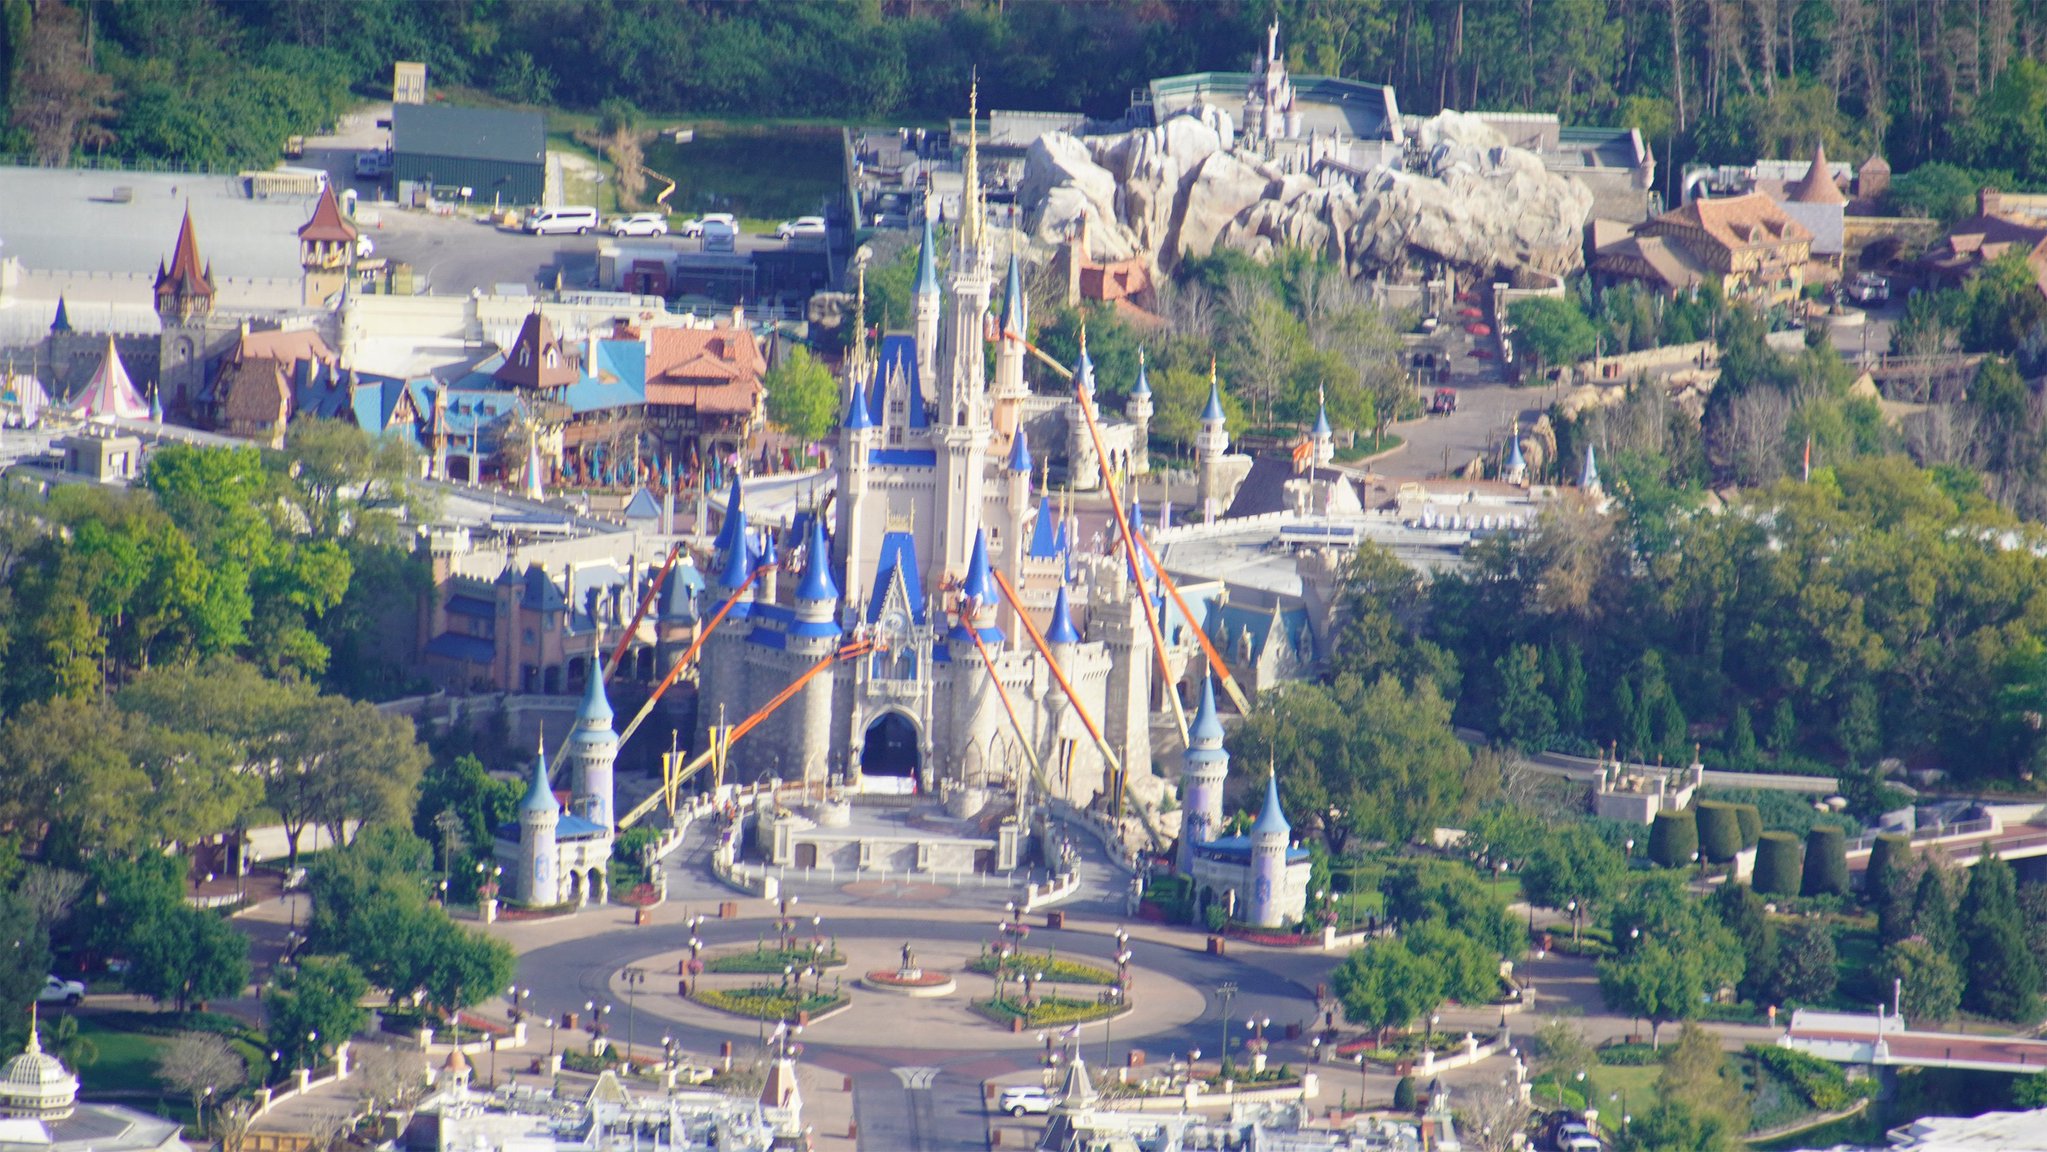 Photos Show Disney World Like We’ve Never Seen It Before—completely Empty